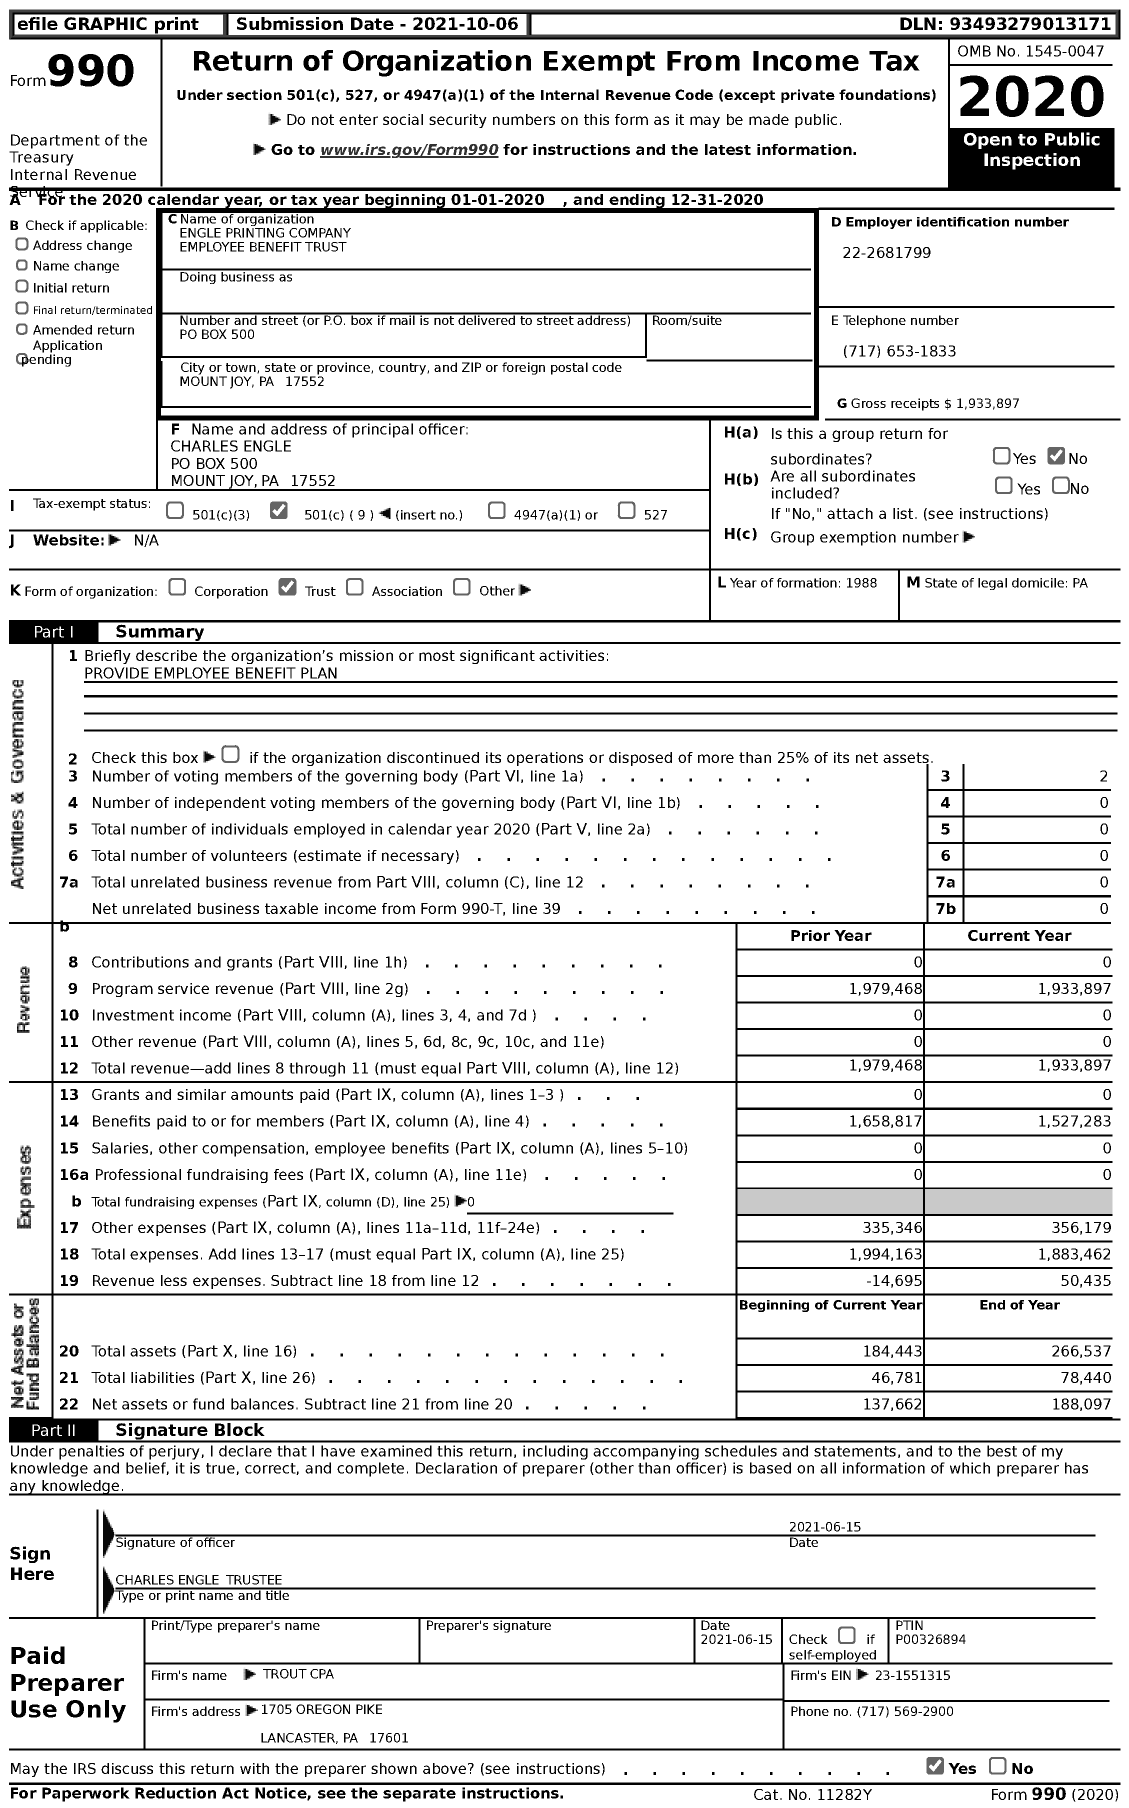 Image of first page of 2020 Form 990 for Engle Printing Company Employee Benefit Trust